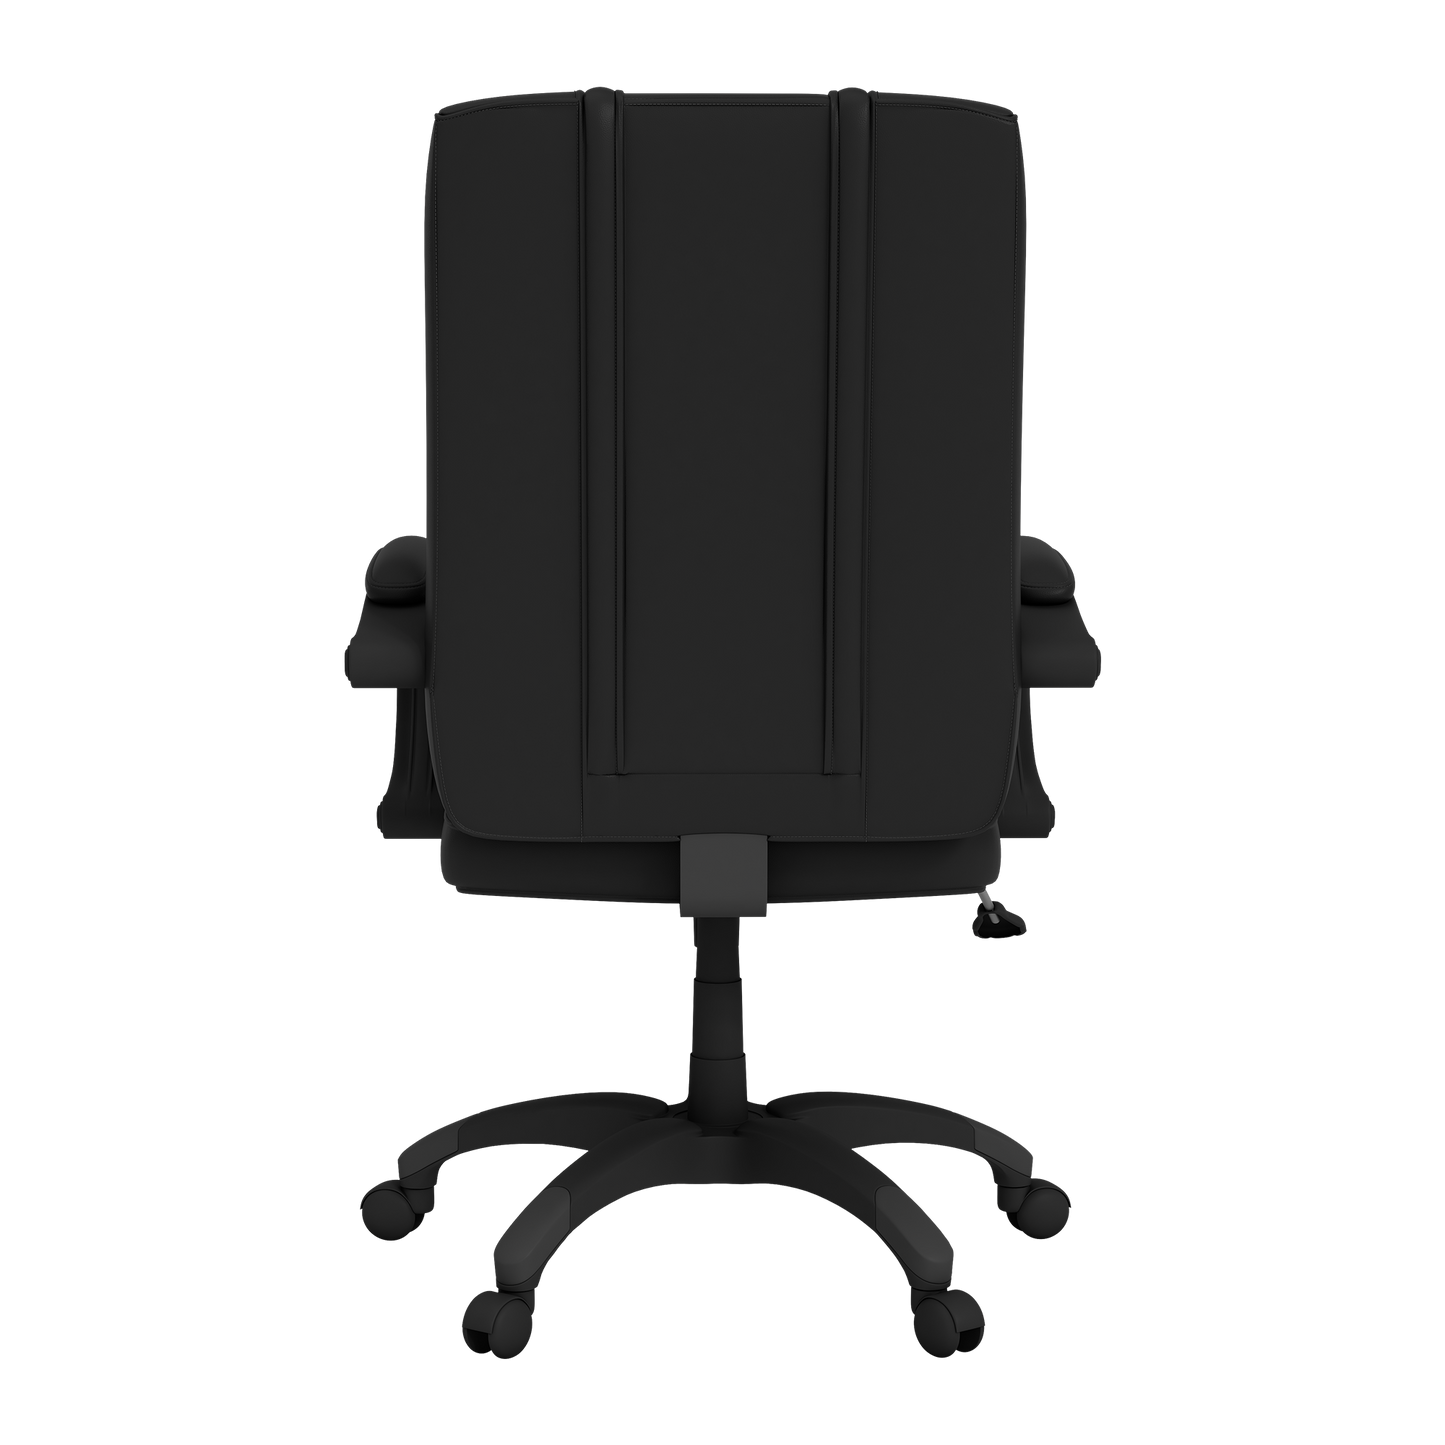 Office Chair 1000 with Kansas City Royals Primary Logo